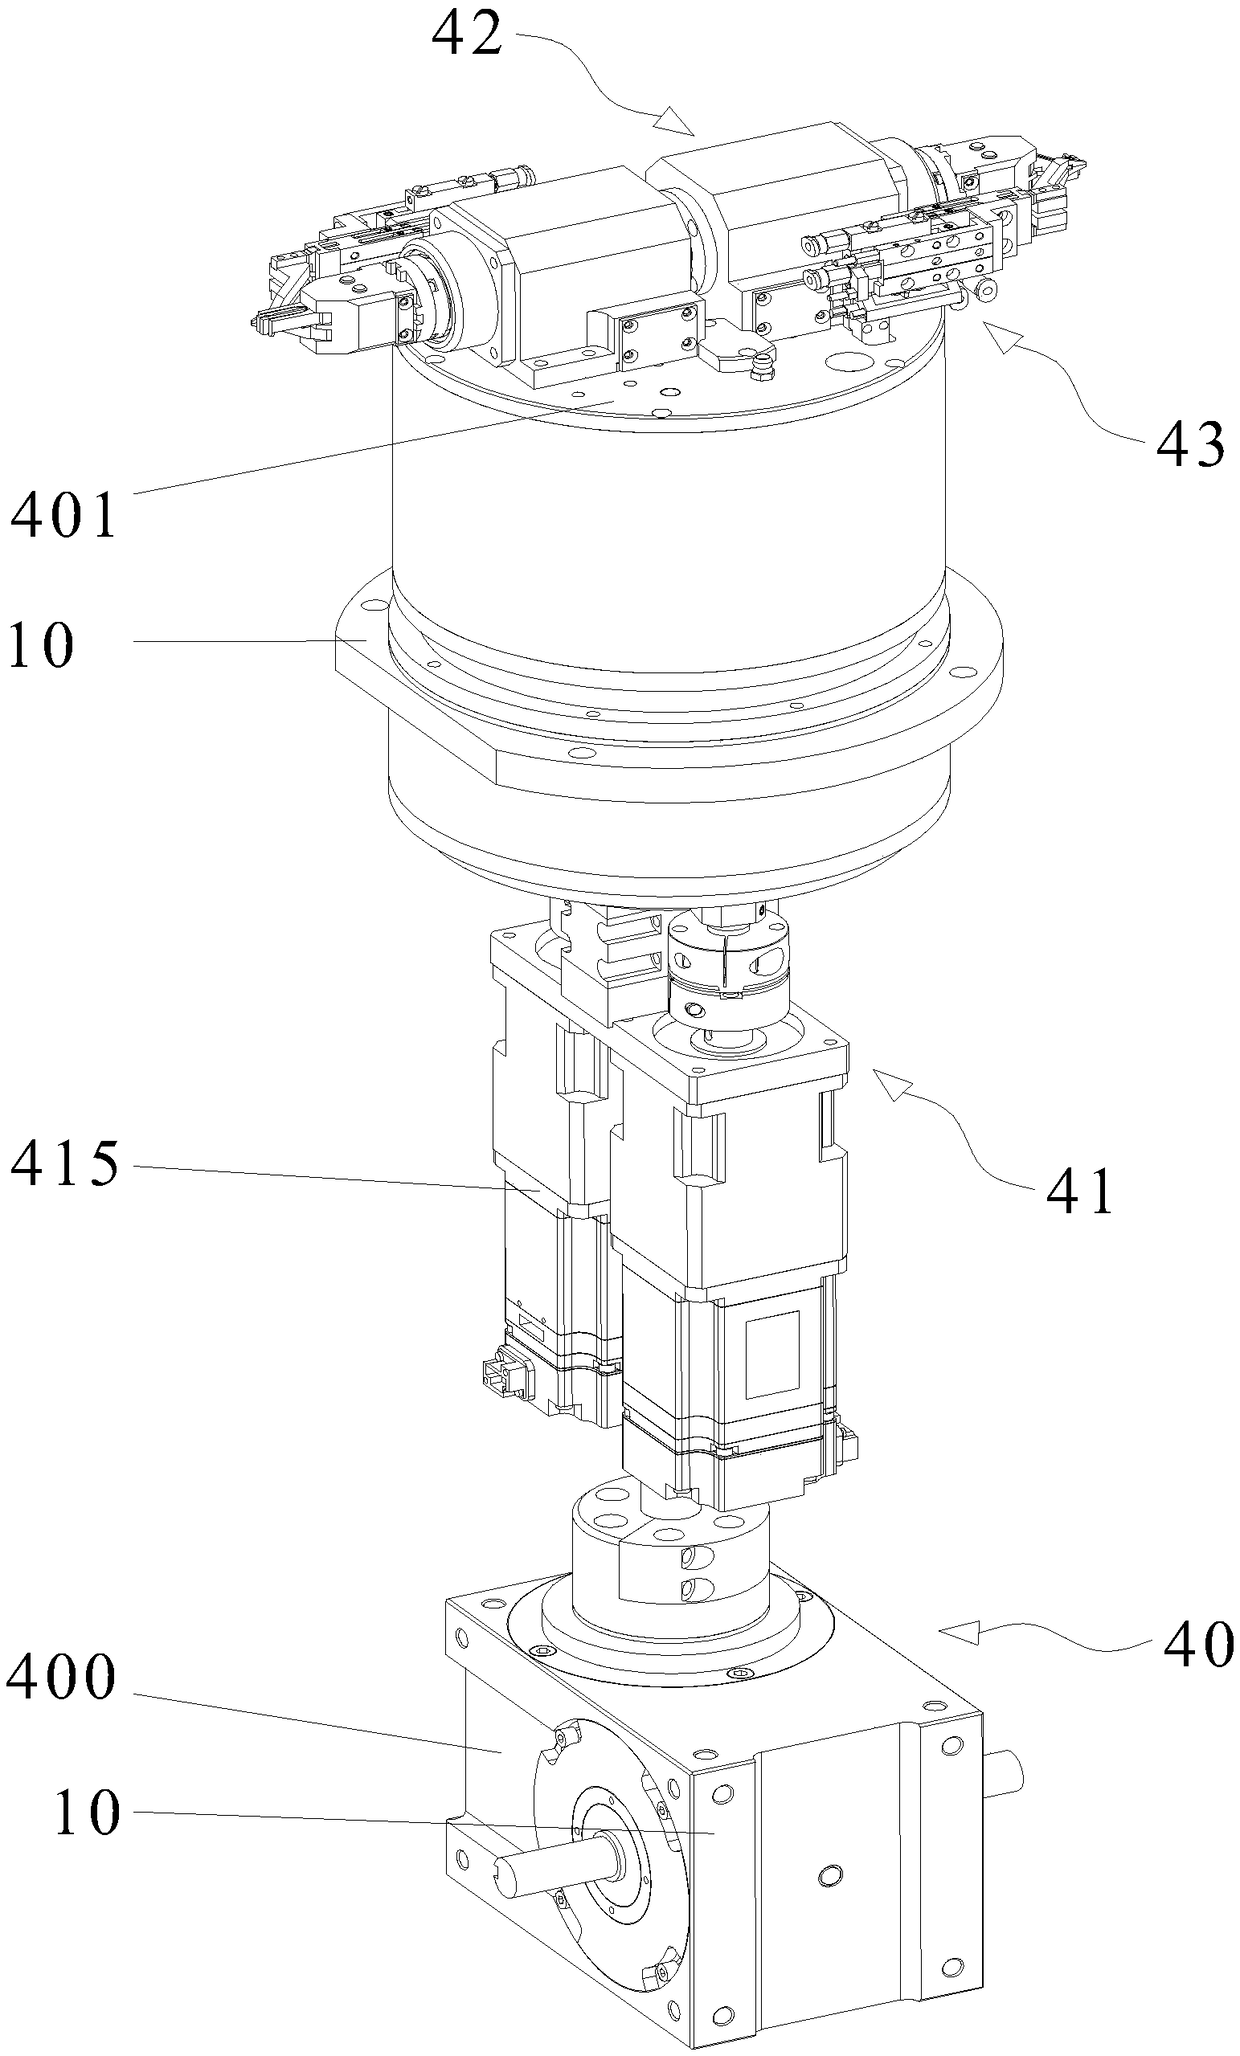 Inductor turn-over mechanism